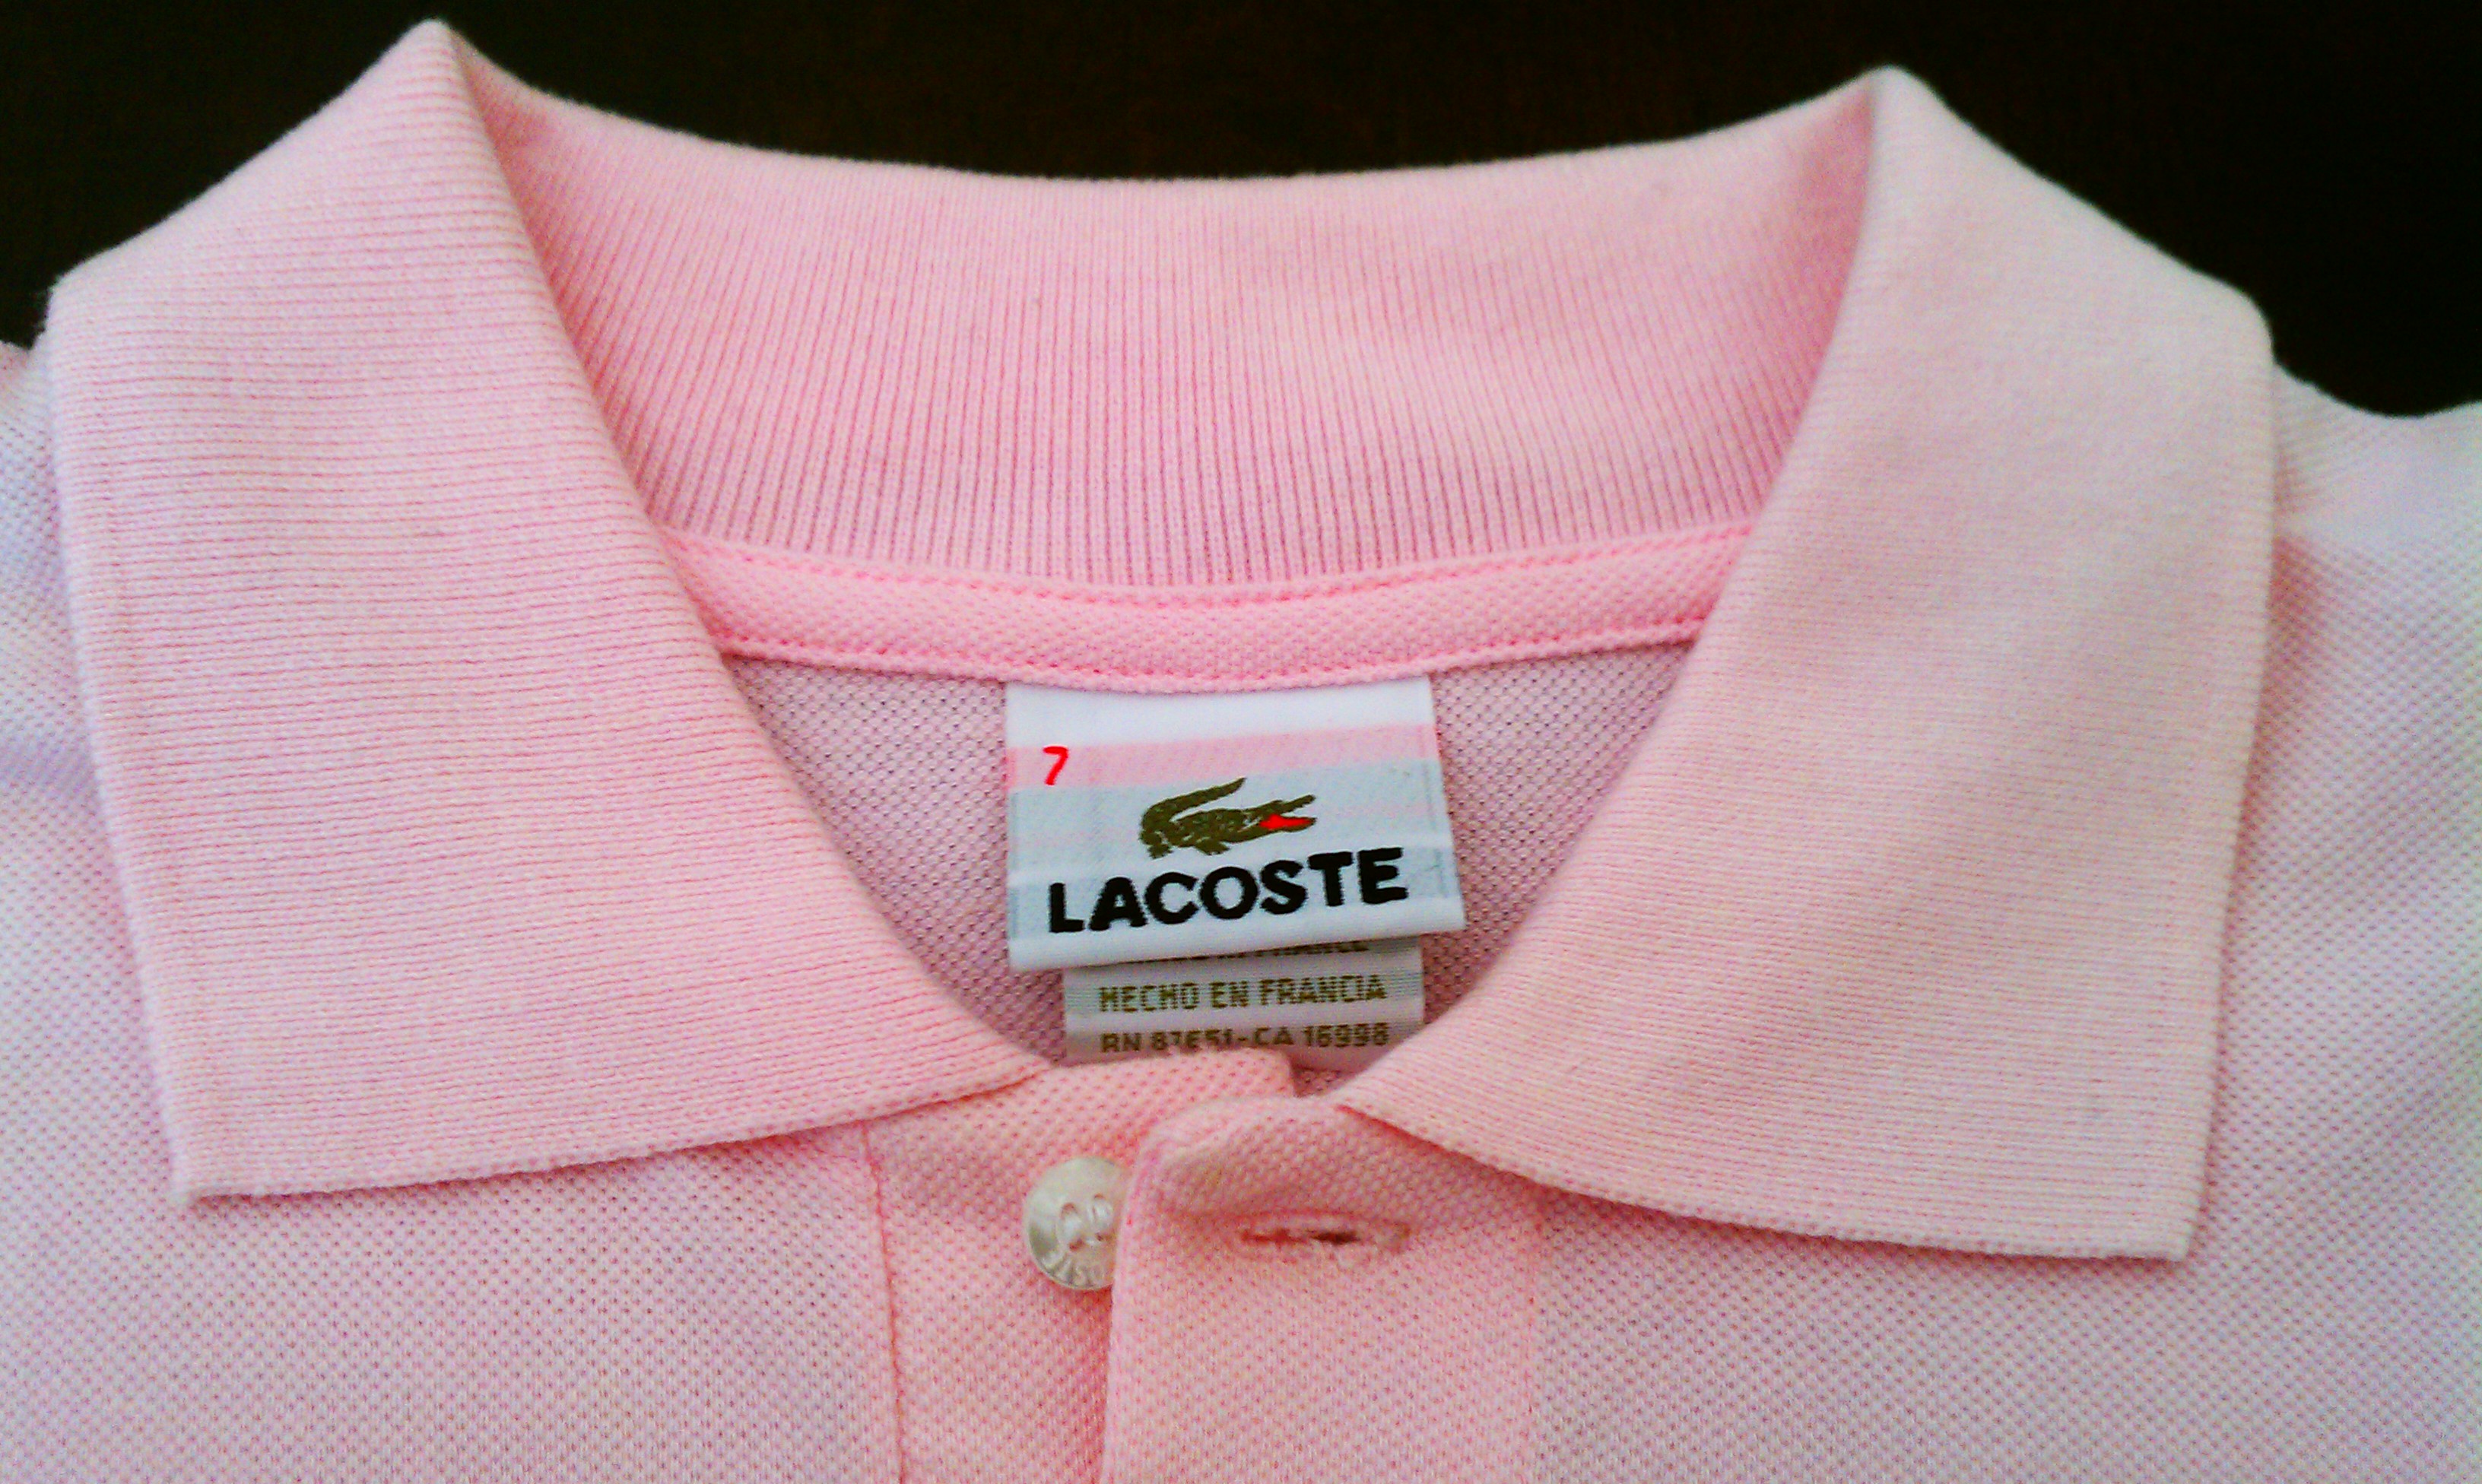 lacoste gateway prices